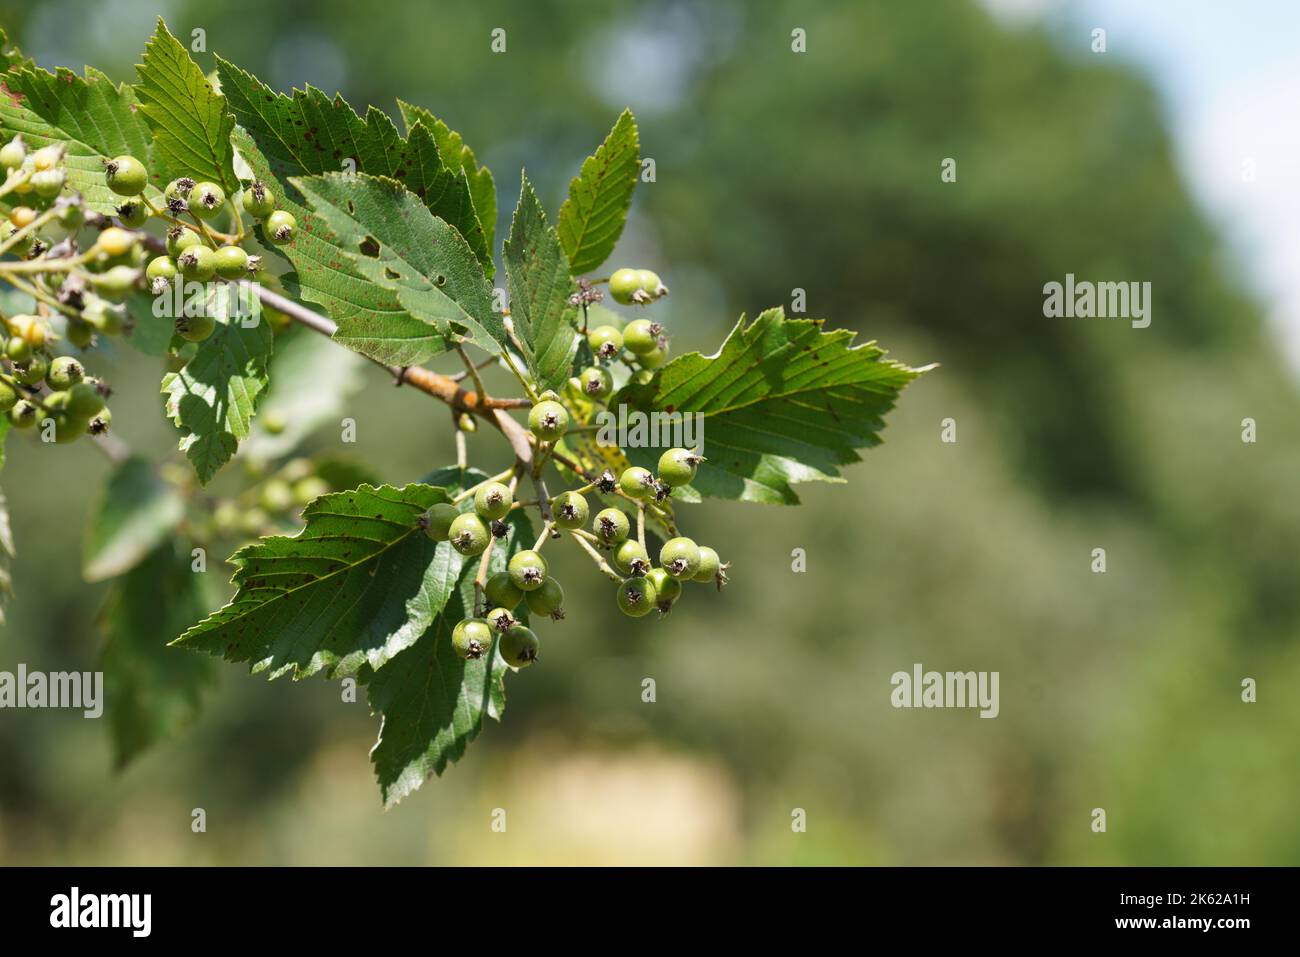 A closeup shot of a Sorbus rupicola plant on a tree on a sunny day Stock Photo